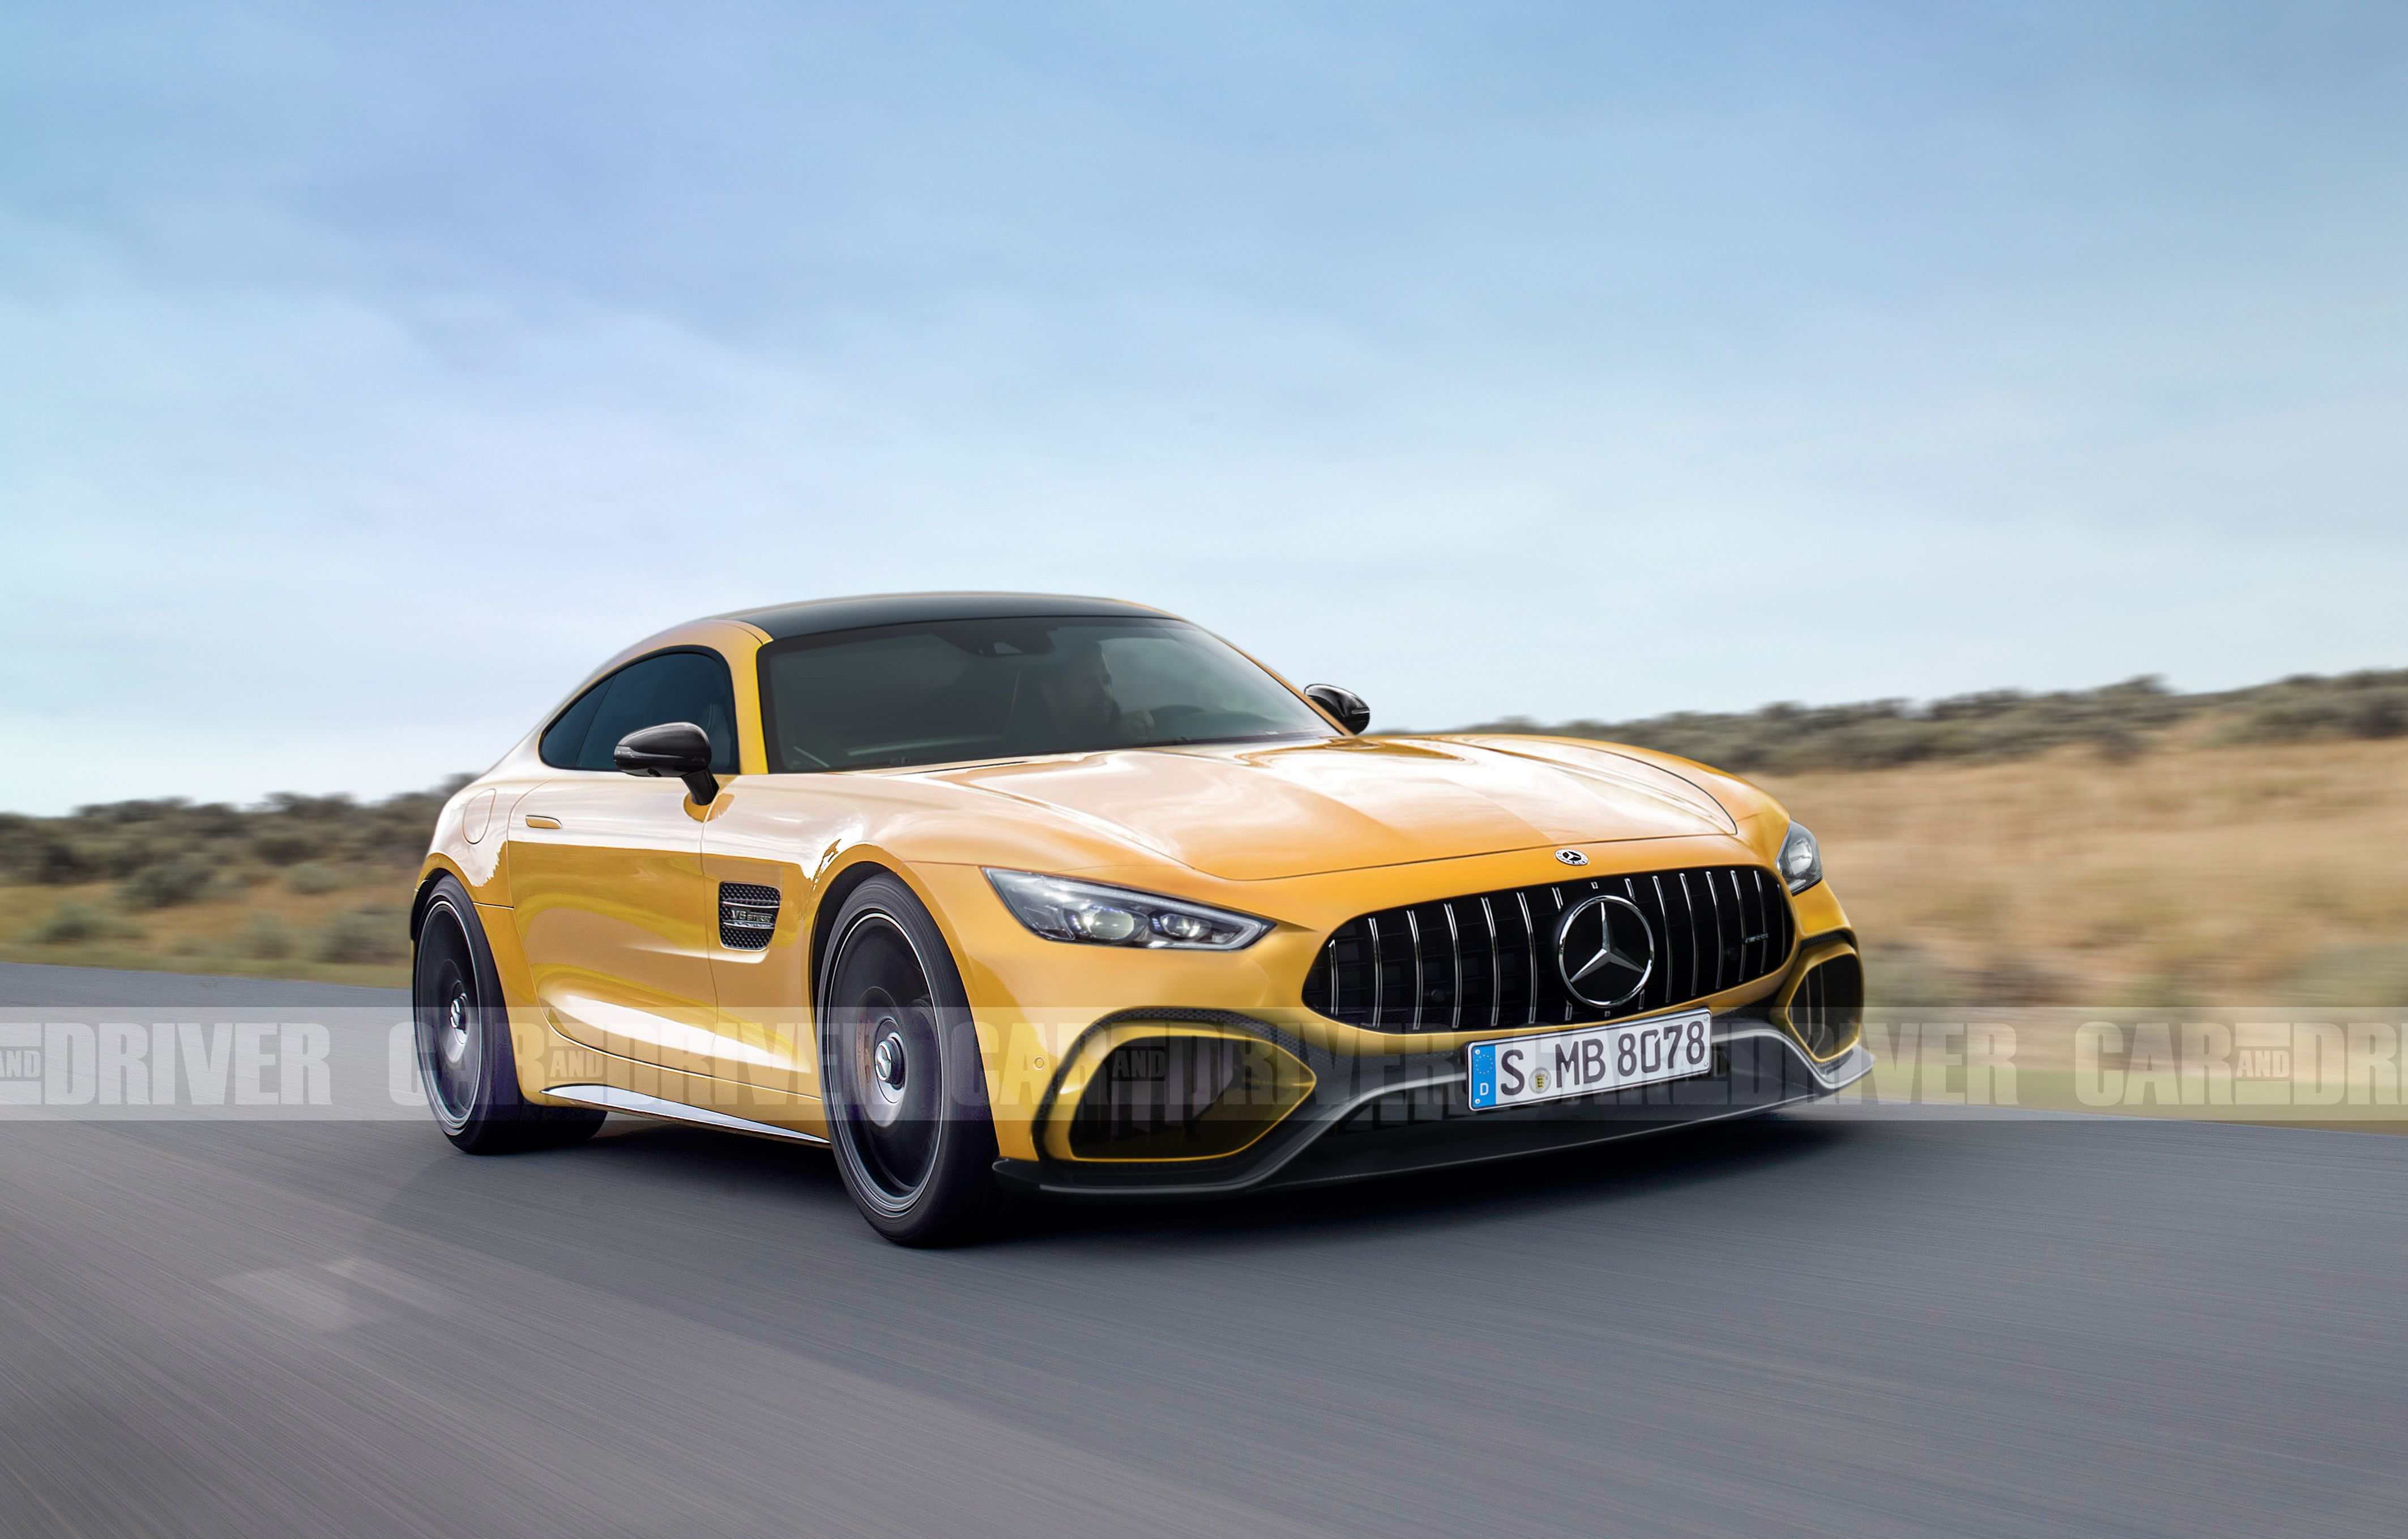 2024 Mercedes-AMG GT Coupe, Future Vehicles